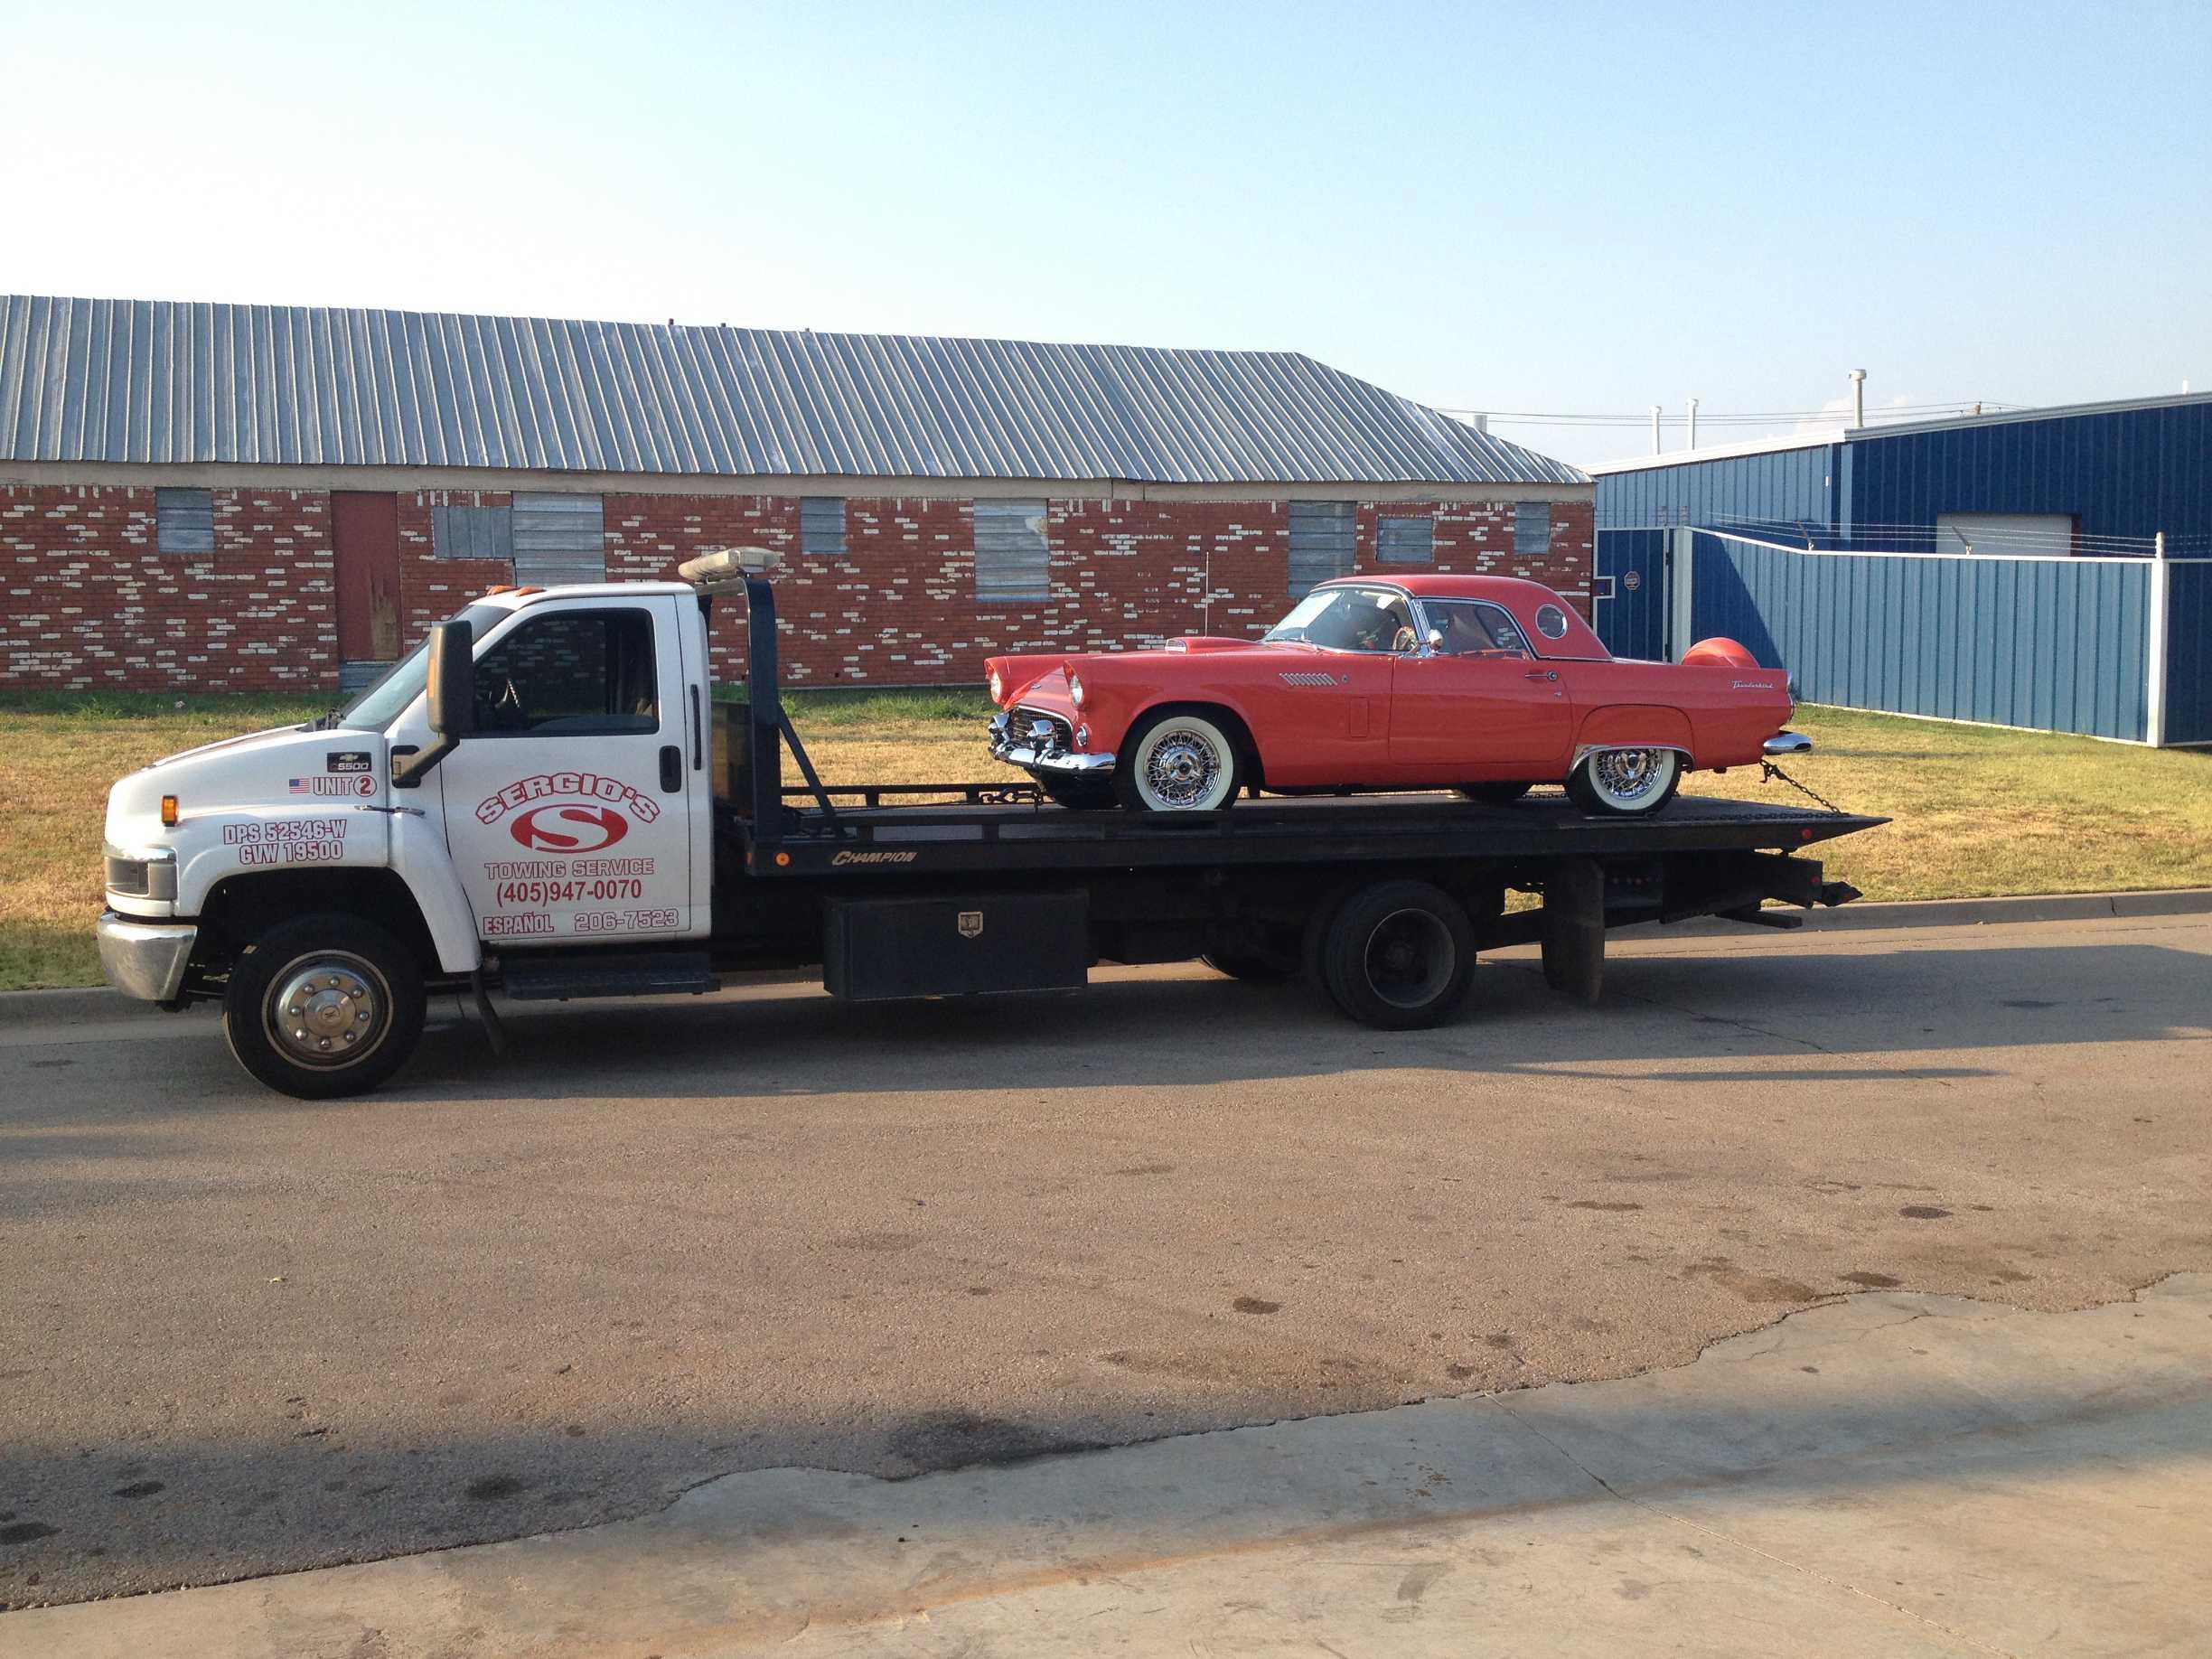 Sergios Towing Service Photo